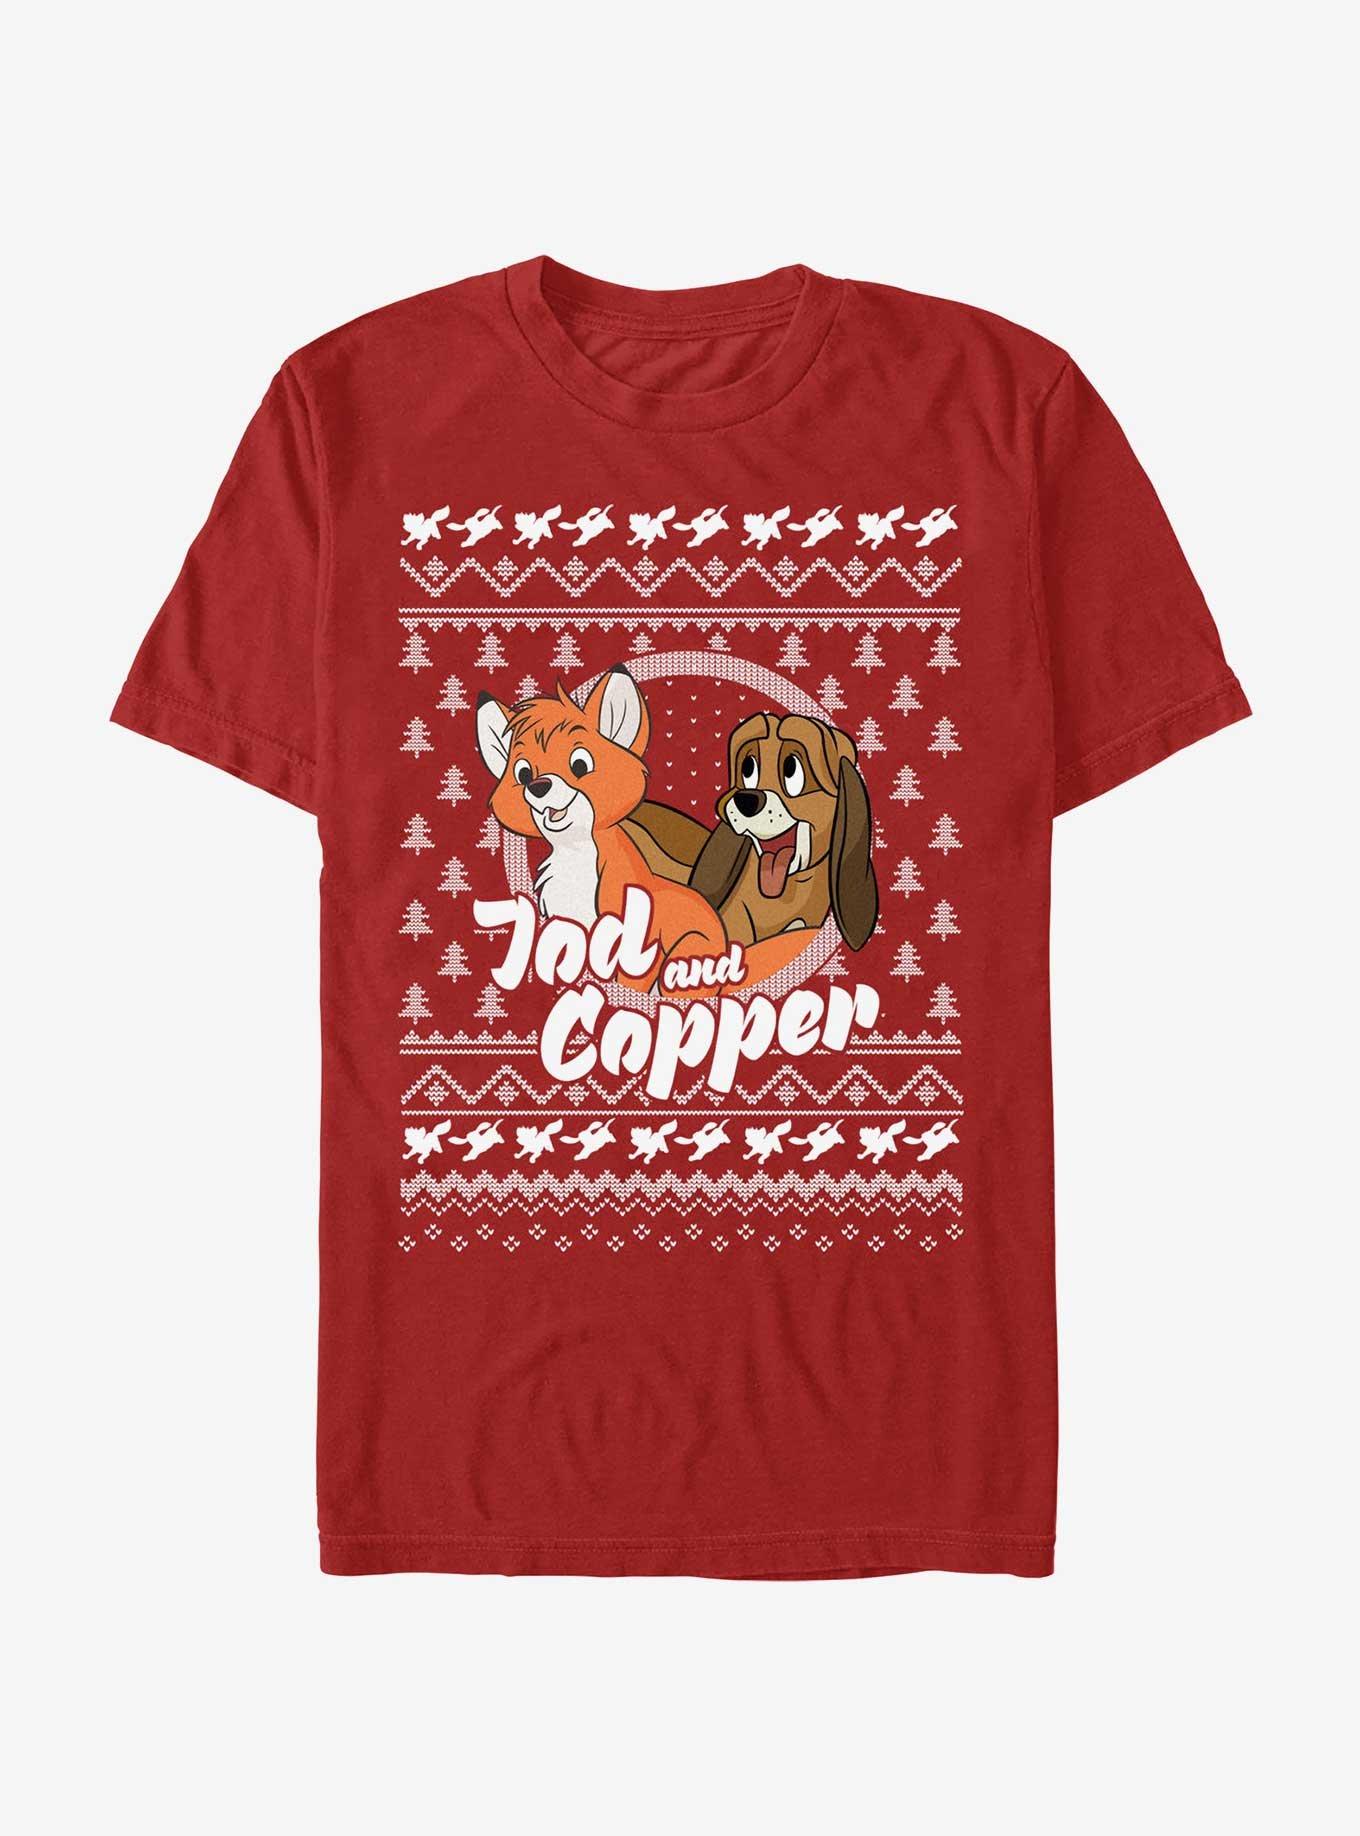 Disney The Fox and the Hound Tod and Copper Ugly Christmas T-Shirt, RED, hi-res